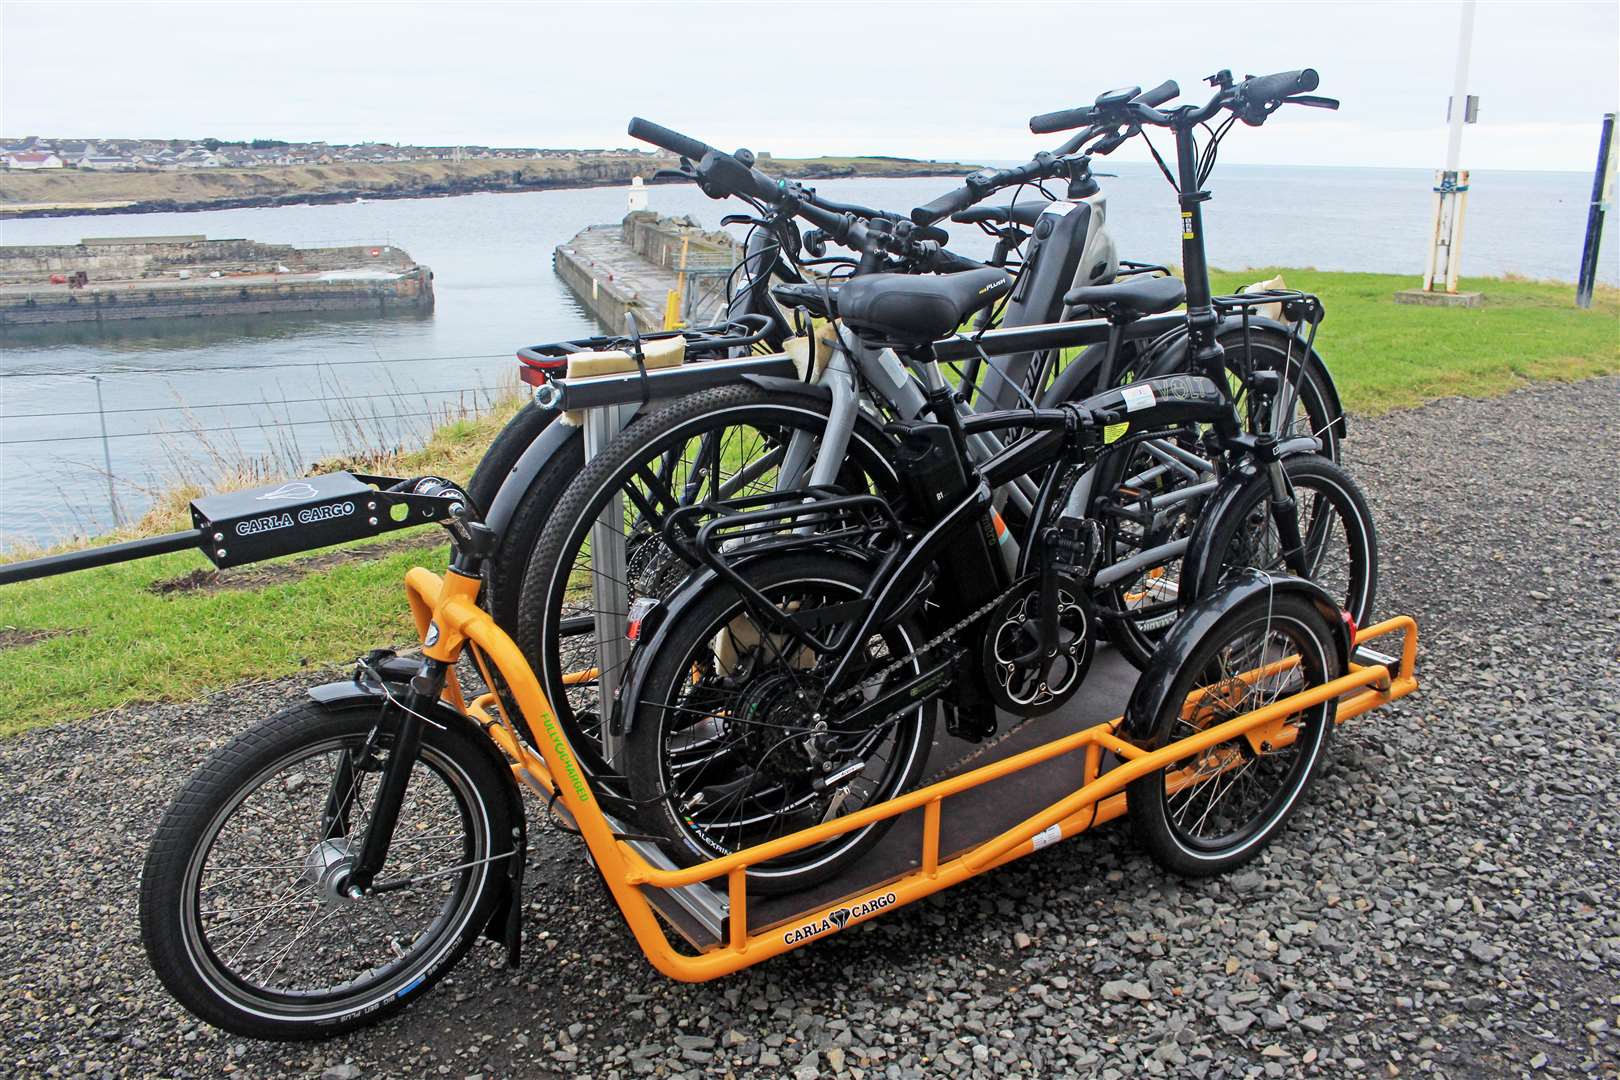 The Carla cargo trailer was acquired as part of Cycling UK's Rural Connections initiative.